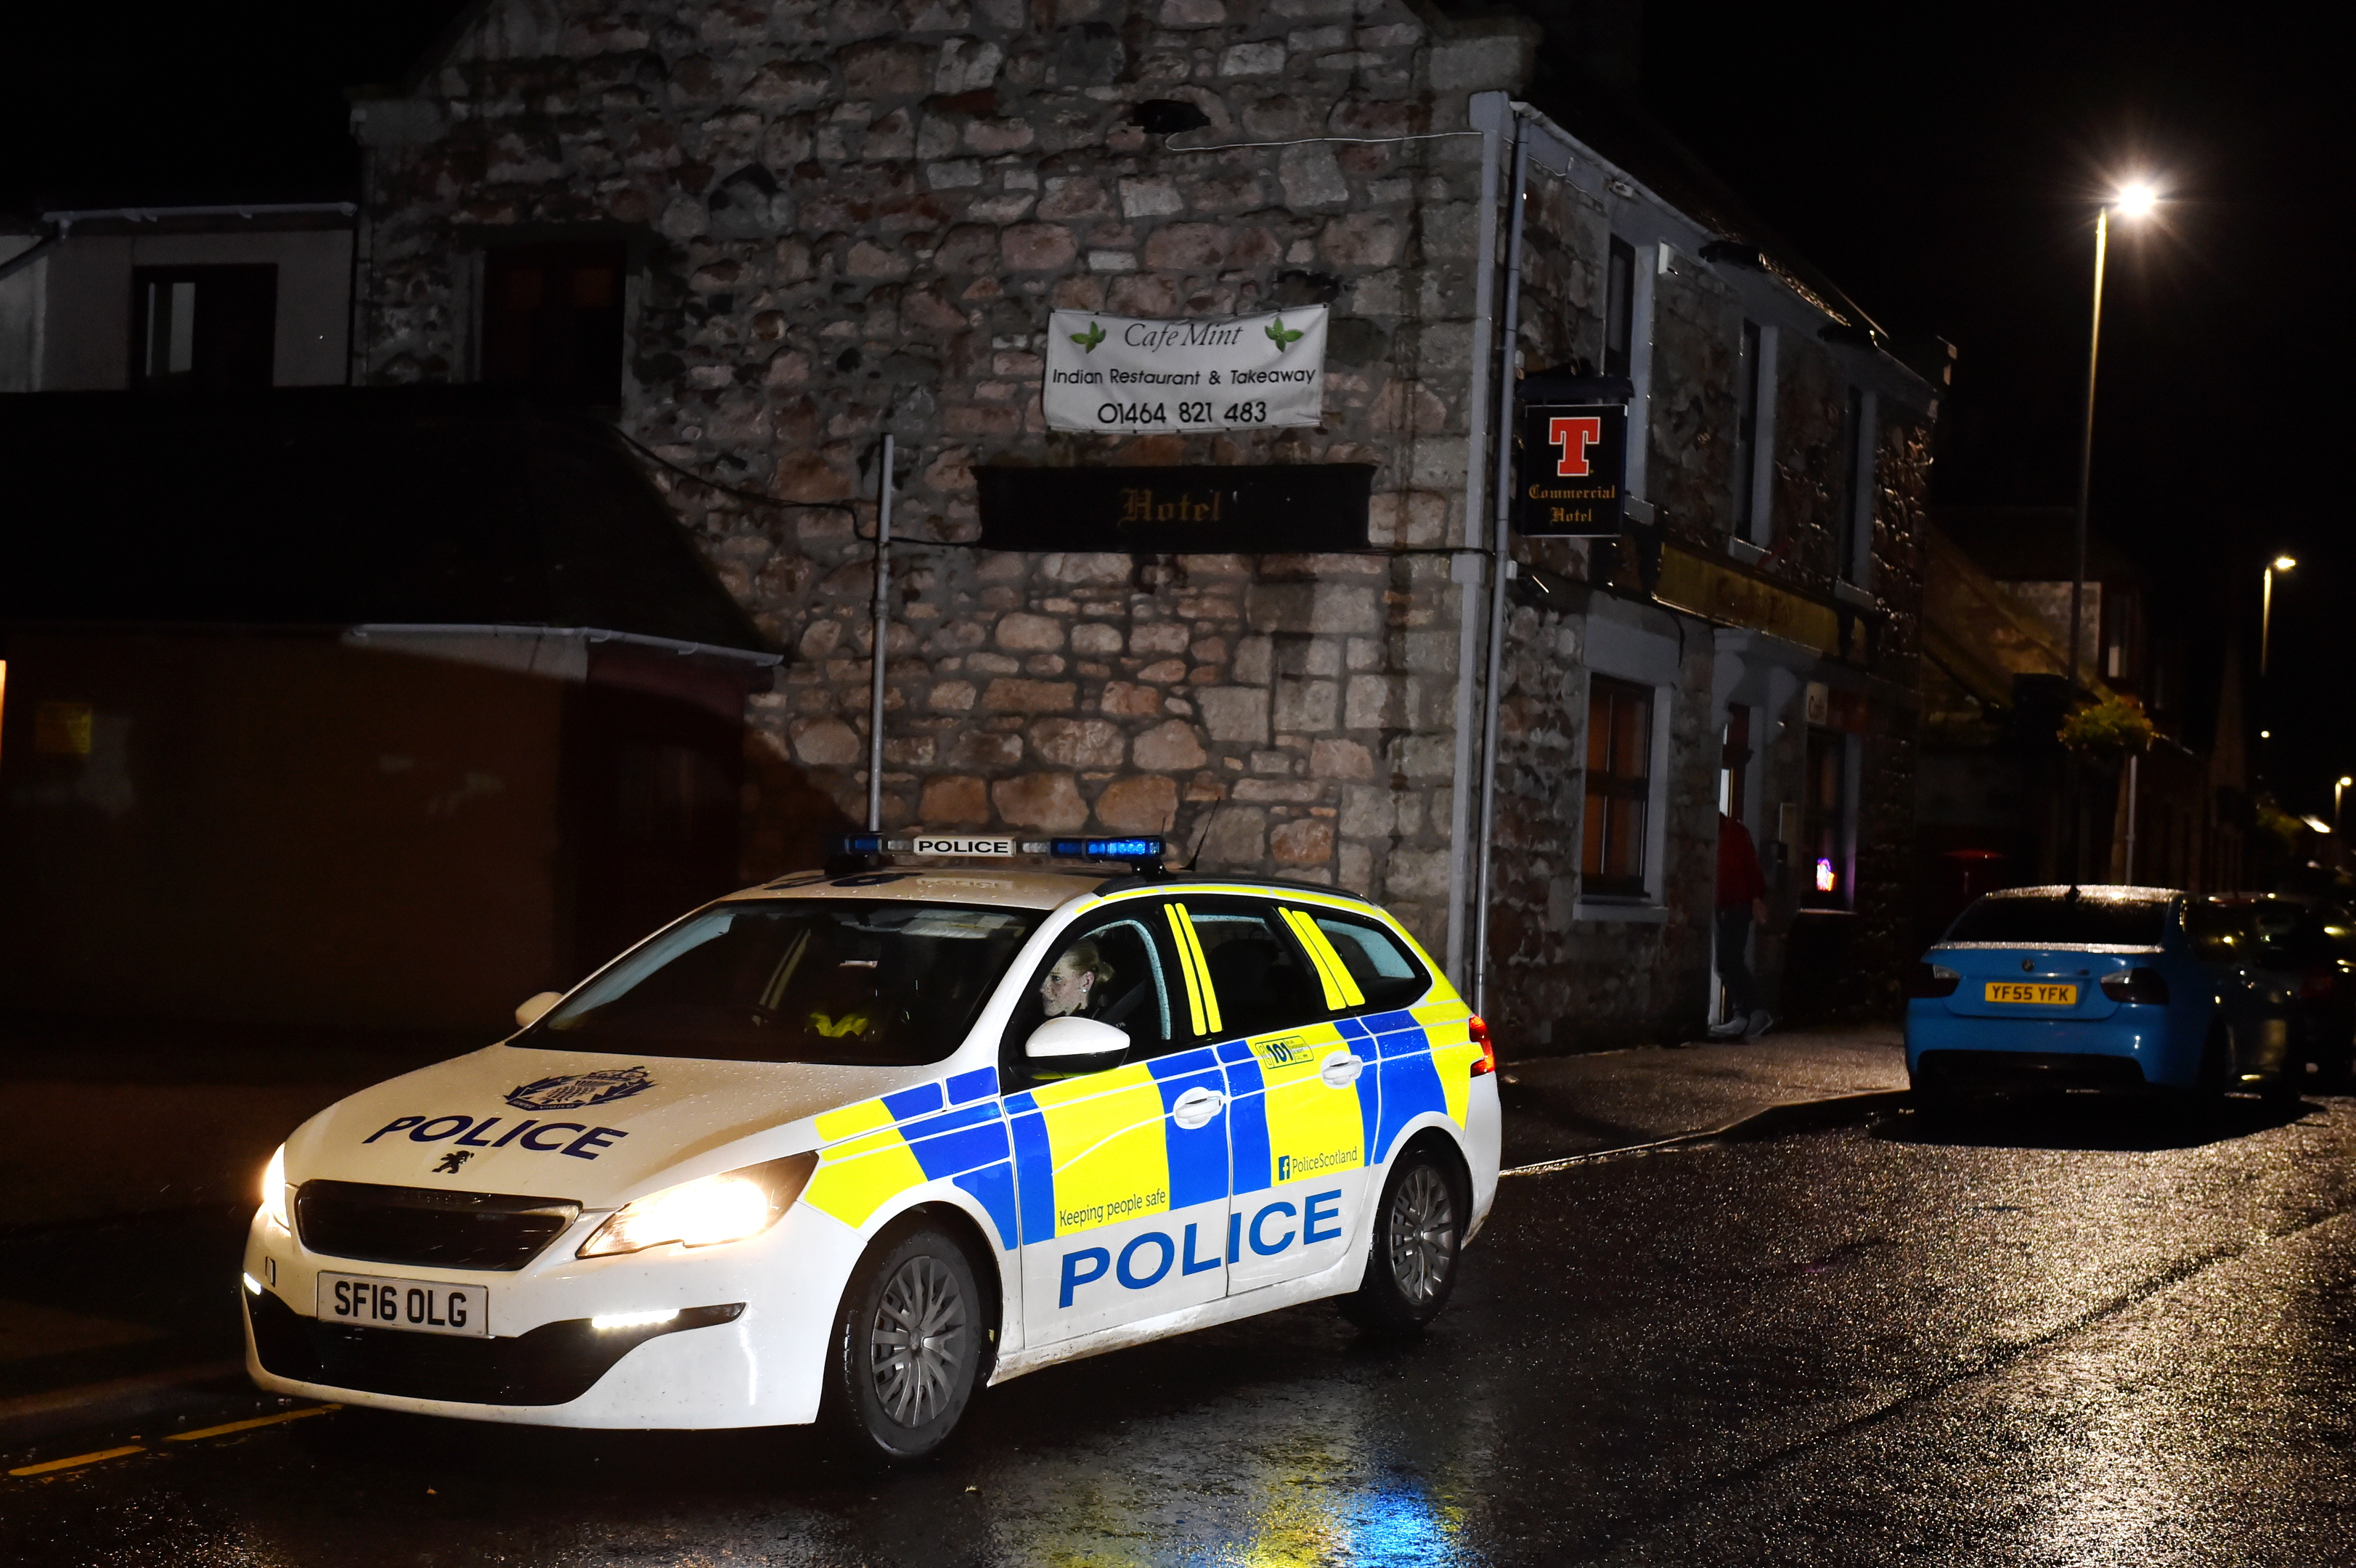 Police at the scene of the incident outside the Commercial Hotel, Insch.